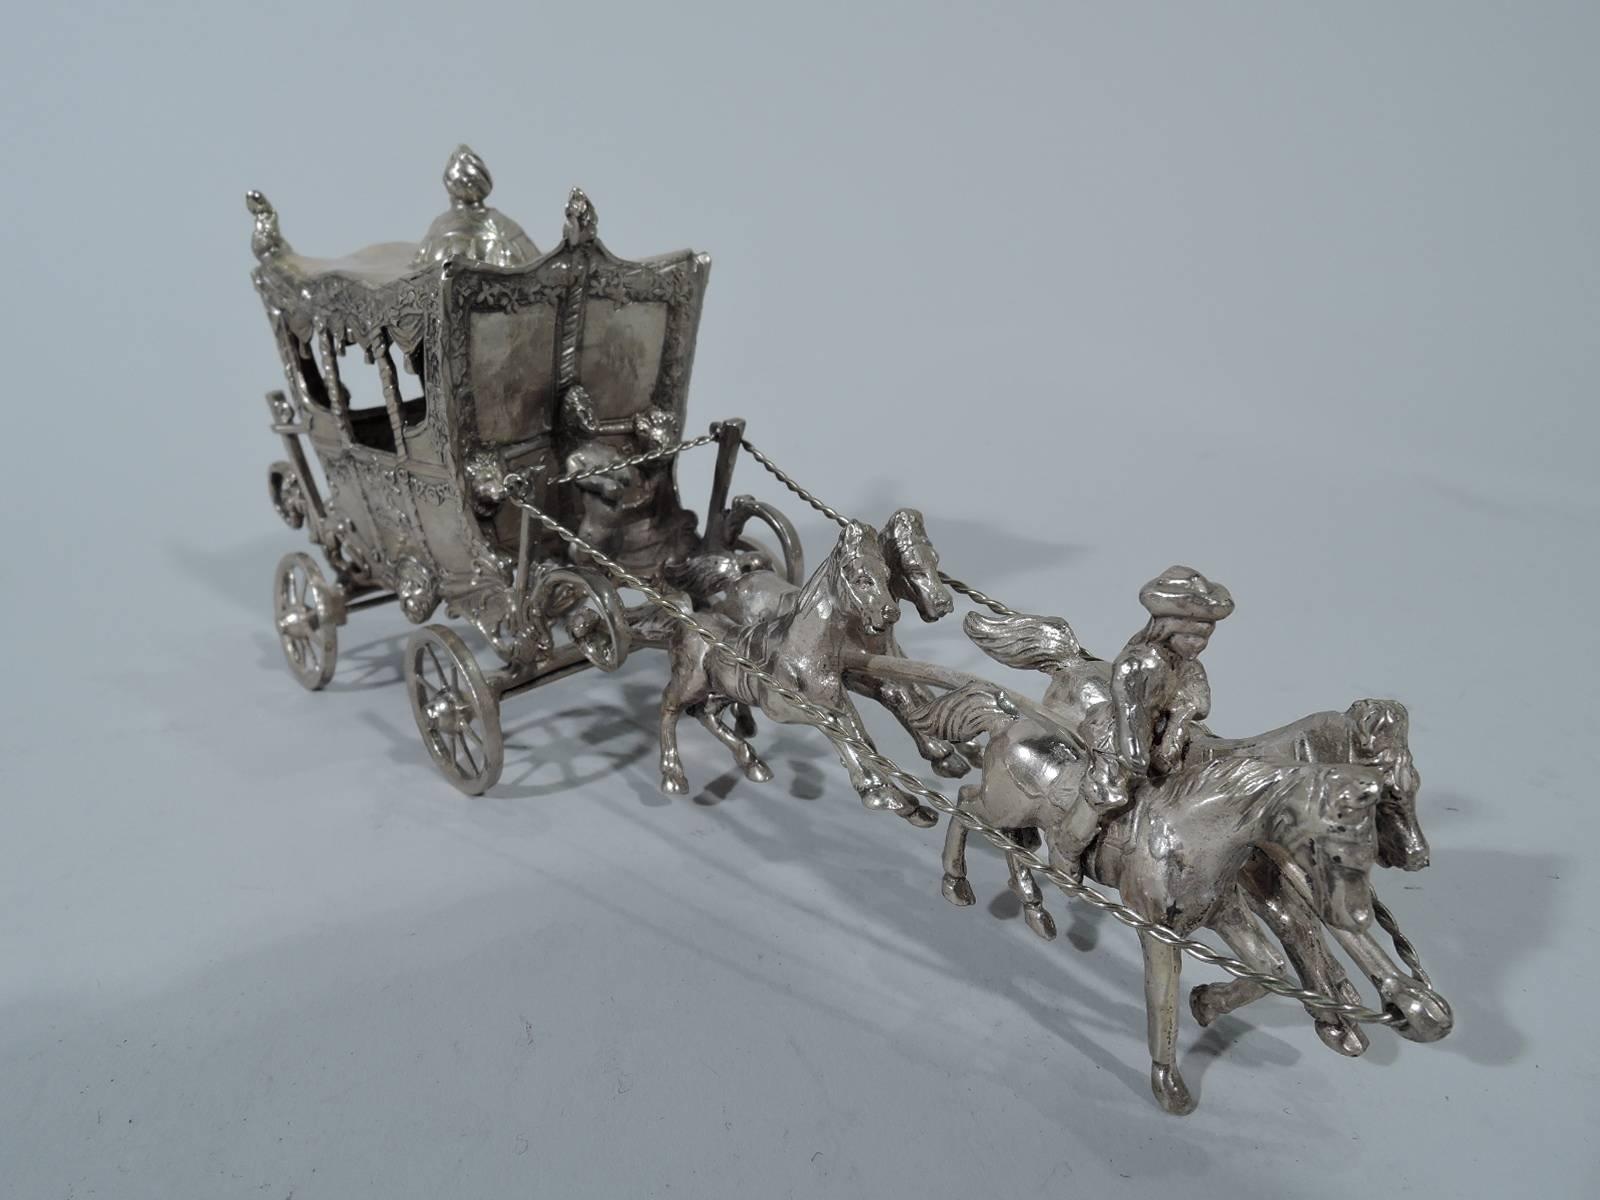 Antique German sterling silver coach-and-four. Exterior decorated with garlands and masks. Fancy swags hang inside windows. Caryatid coachman and postillions. Coach harnessed to four galloping horses (one mounted by man in tricorn hat). A sweet